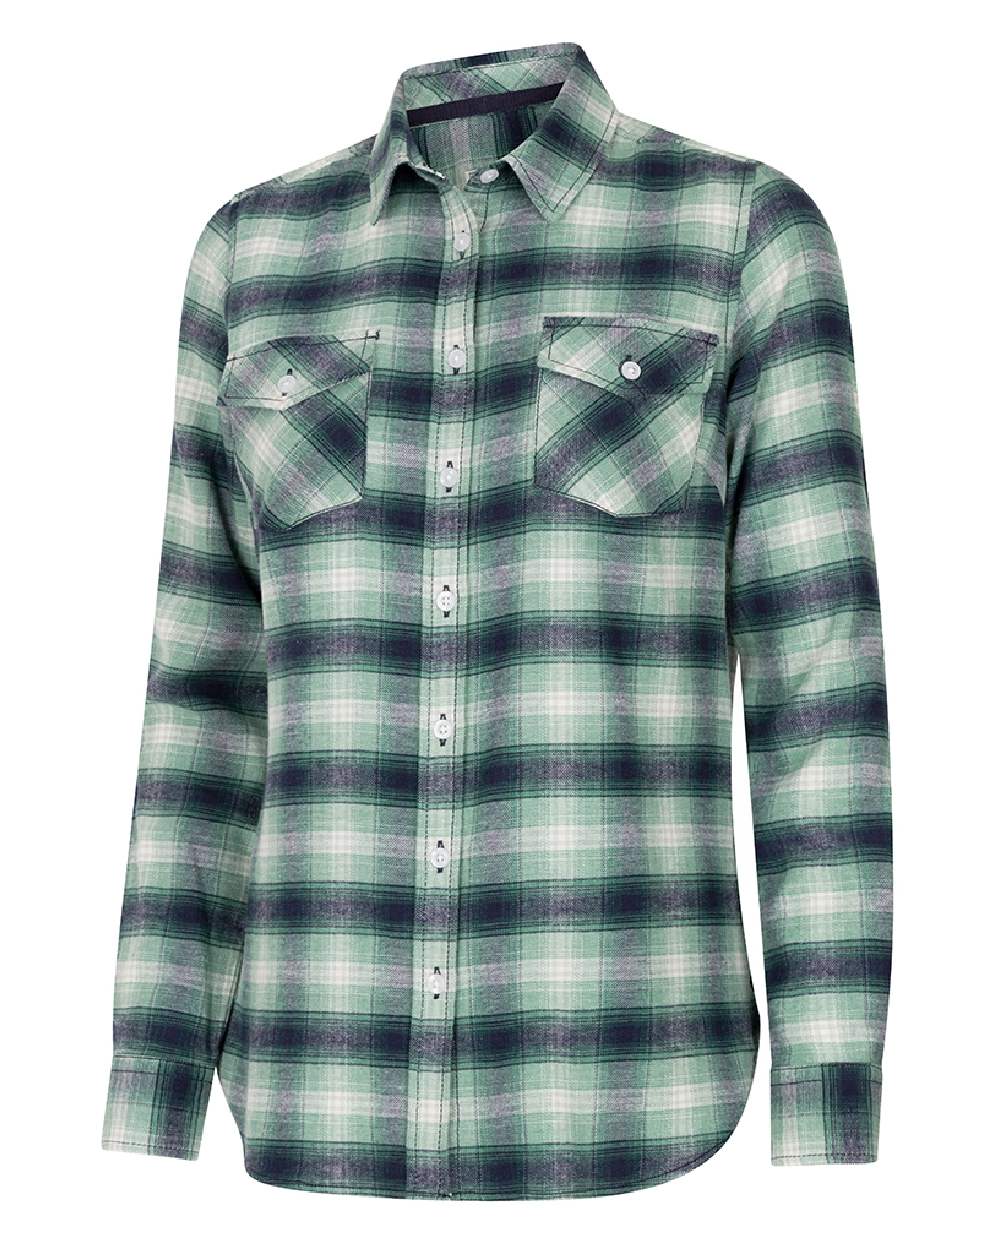 Hoggs of Fife Isla Flannel Check Shirt in Green 